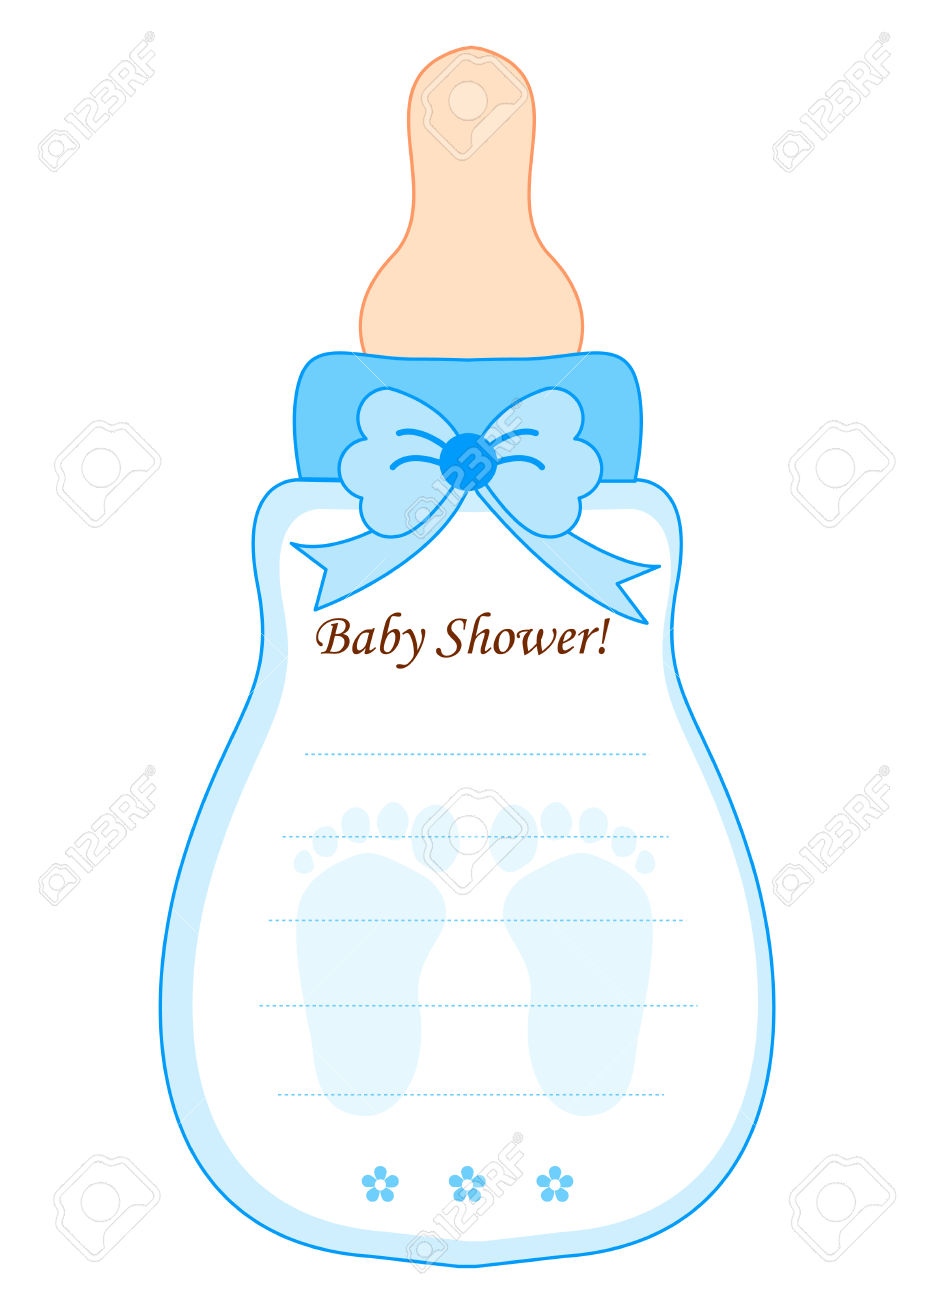 Clipart Baby Shower Invitations.